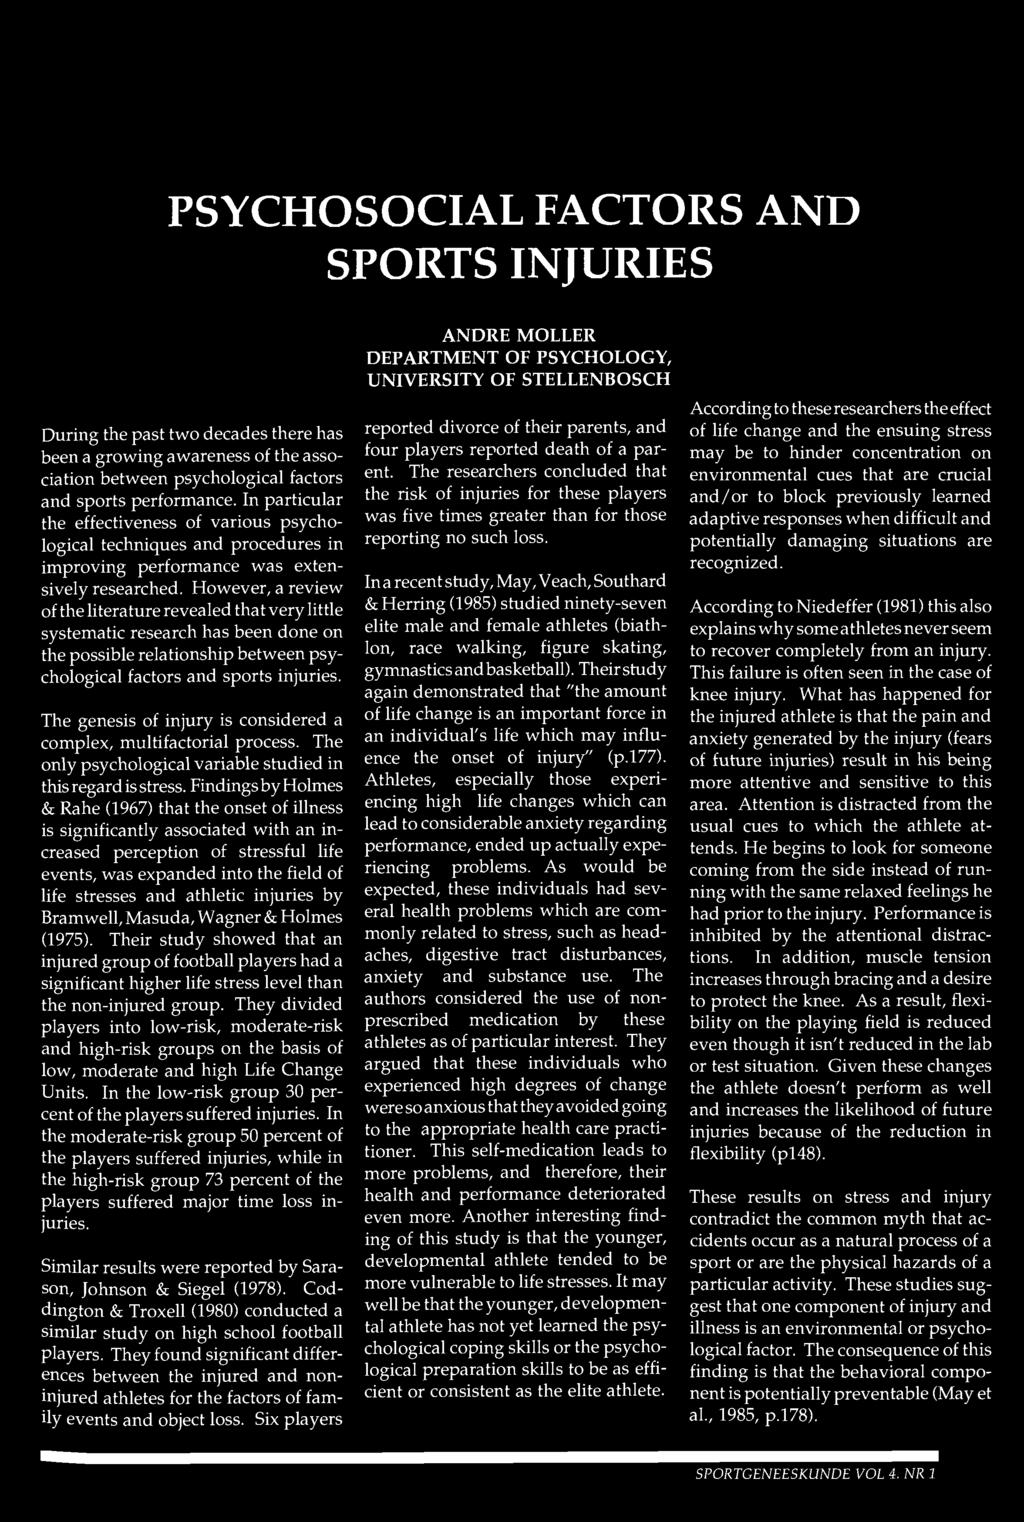 PSYCHOSOCIAL FACTORS AND SPORTS INJURIES ANDRE MOLLER DEPARTMENT OF PSYCHOLOGY, UNIVERSITY OF STELLENBOSCH During the past two decades there has been a growing awareness of the association between